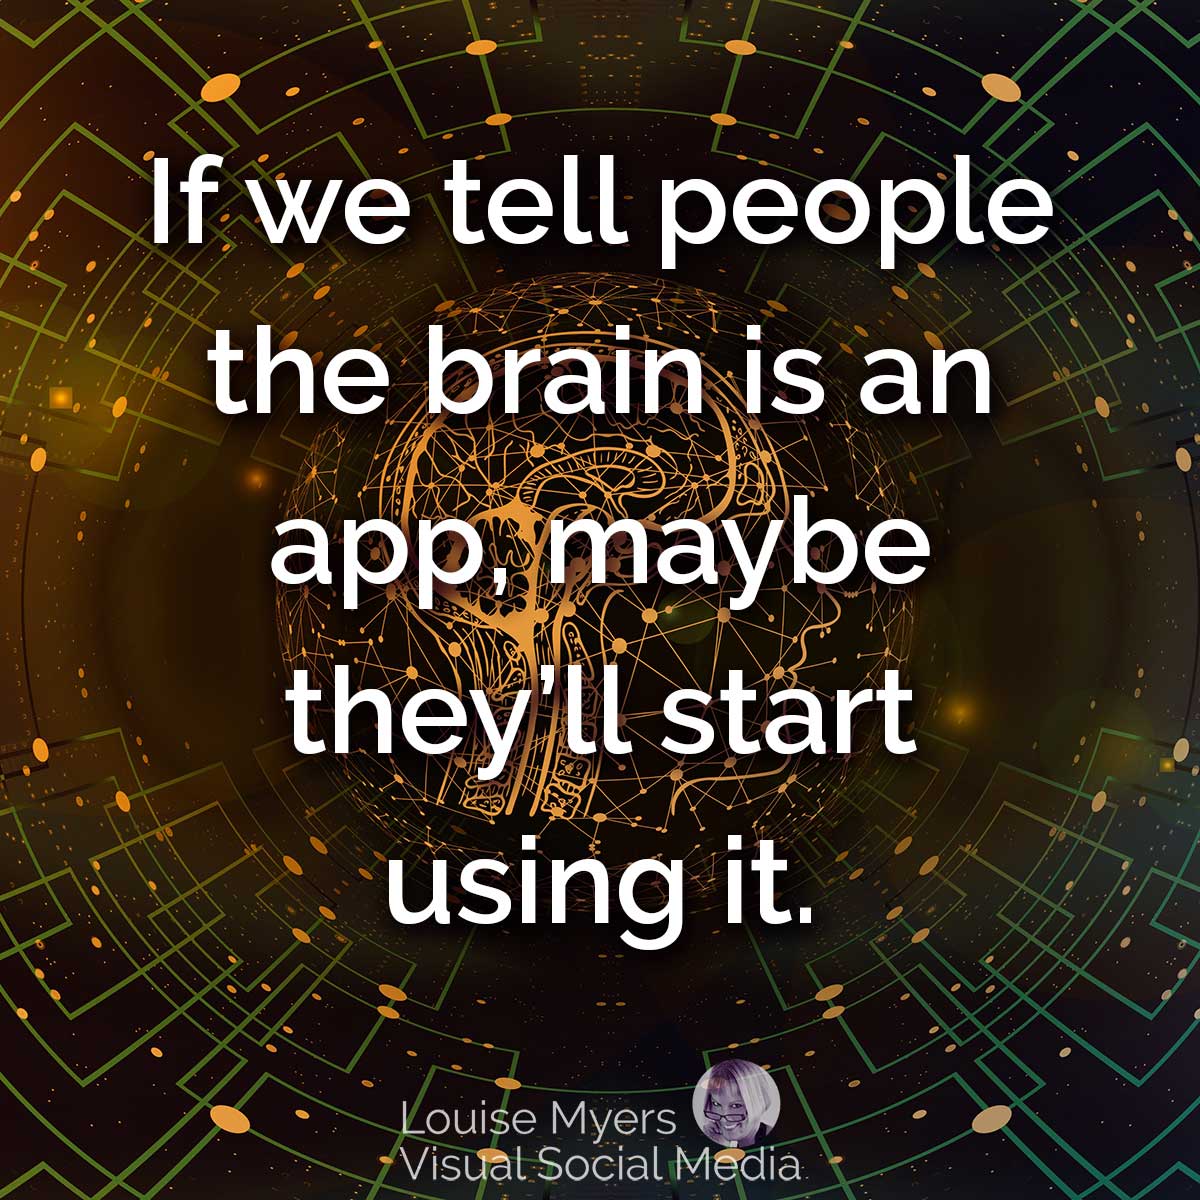 brain wiring image says if we tell people the brain is an app maybe they'll use it.